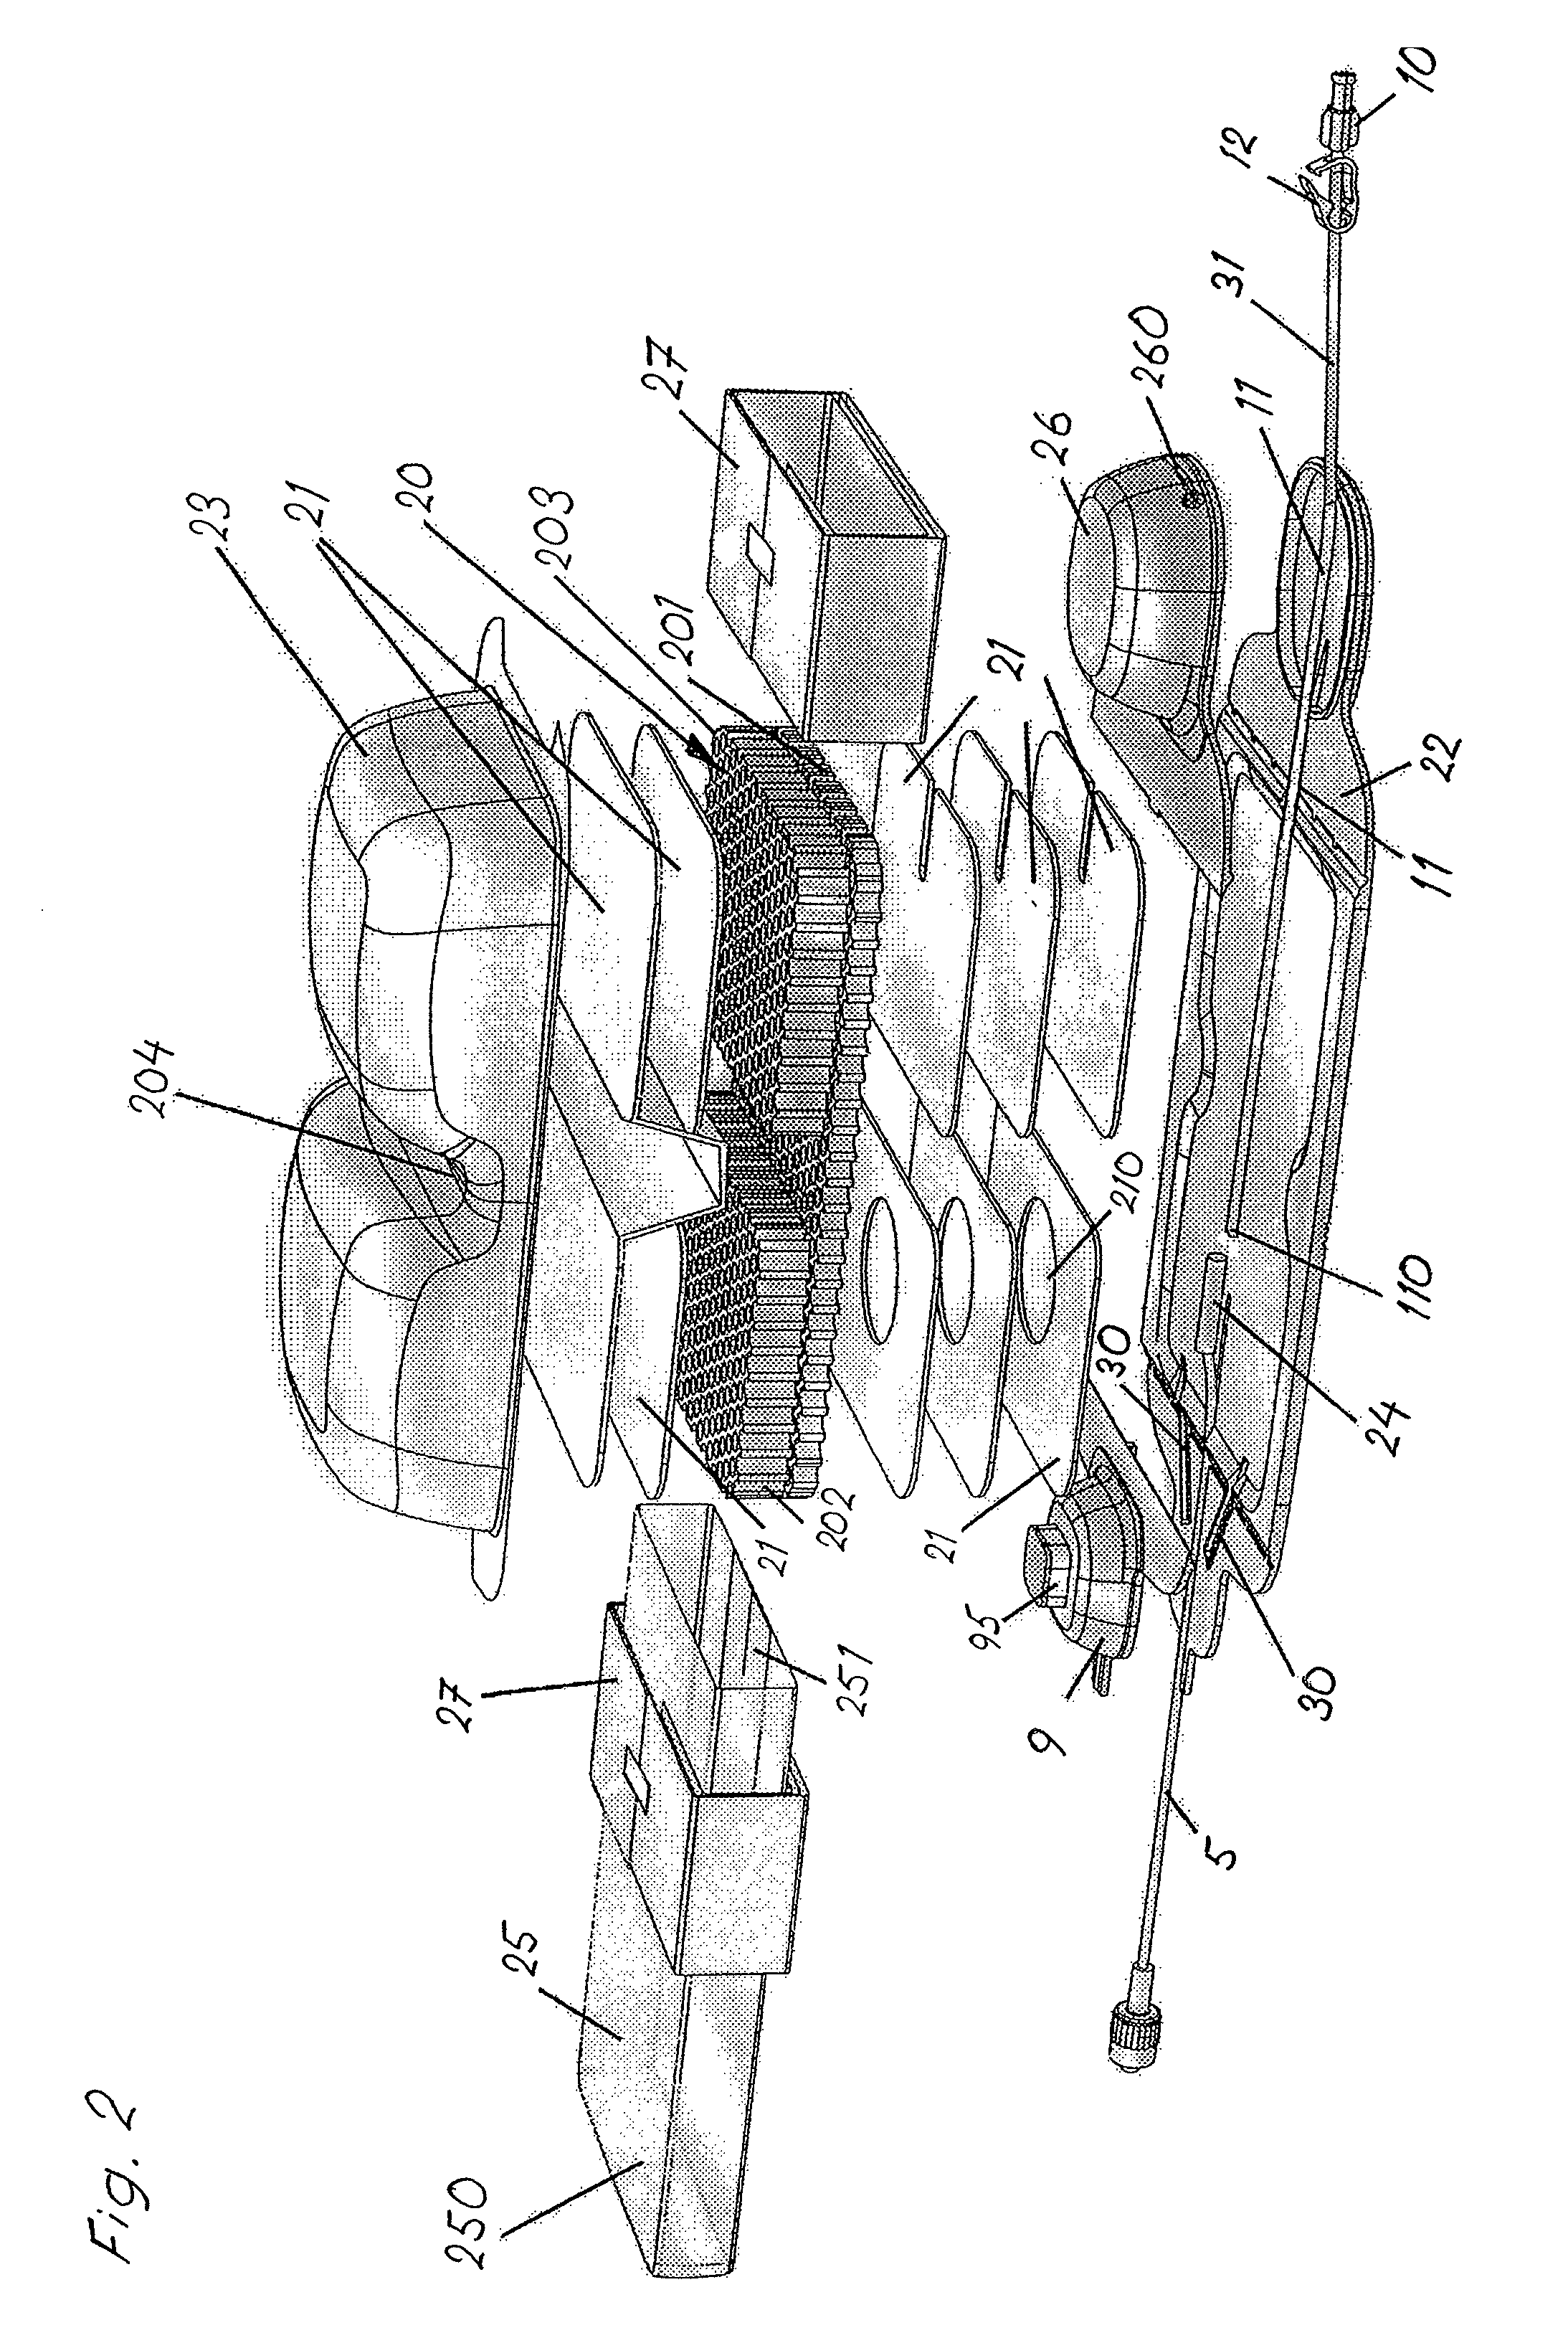 Device for treatment of wound using reduced pressure